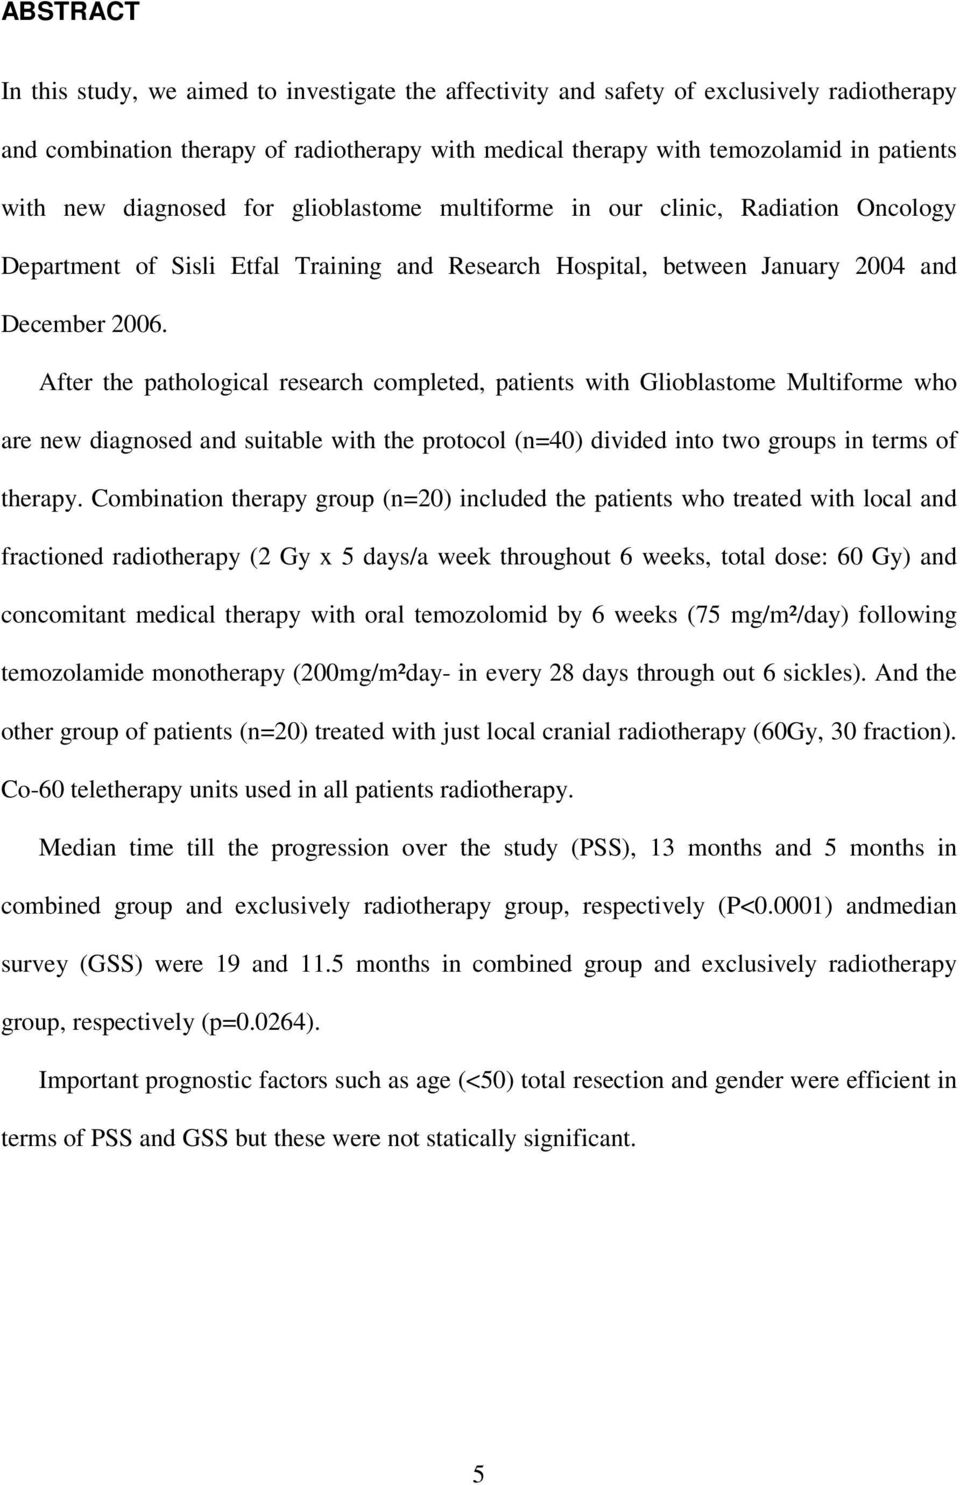 After the pathological research completed, patients with Glioblastome Multiforme who are new diagnosed and suitable with the protocol (n=40) divided into two groups in terms of therapy.